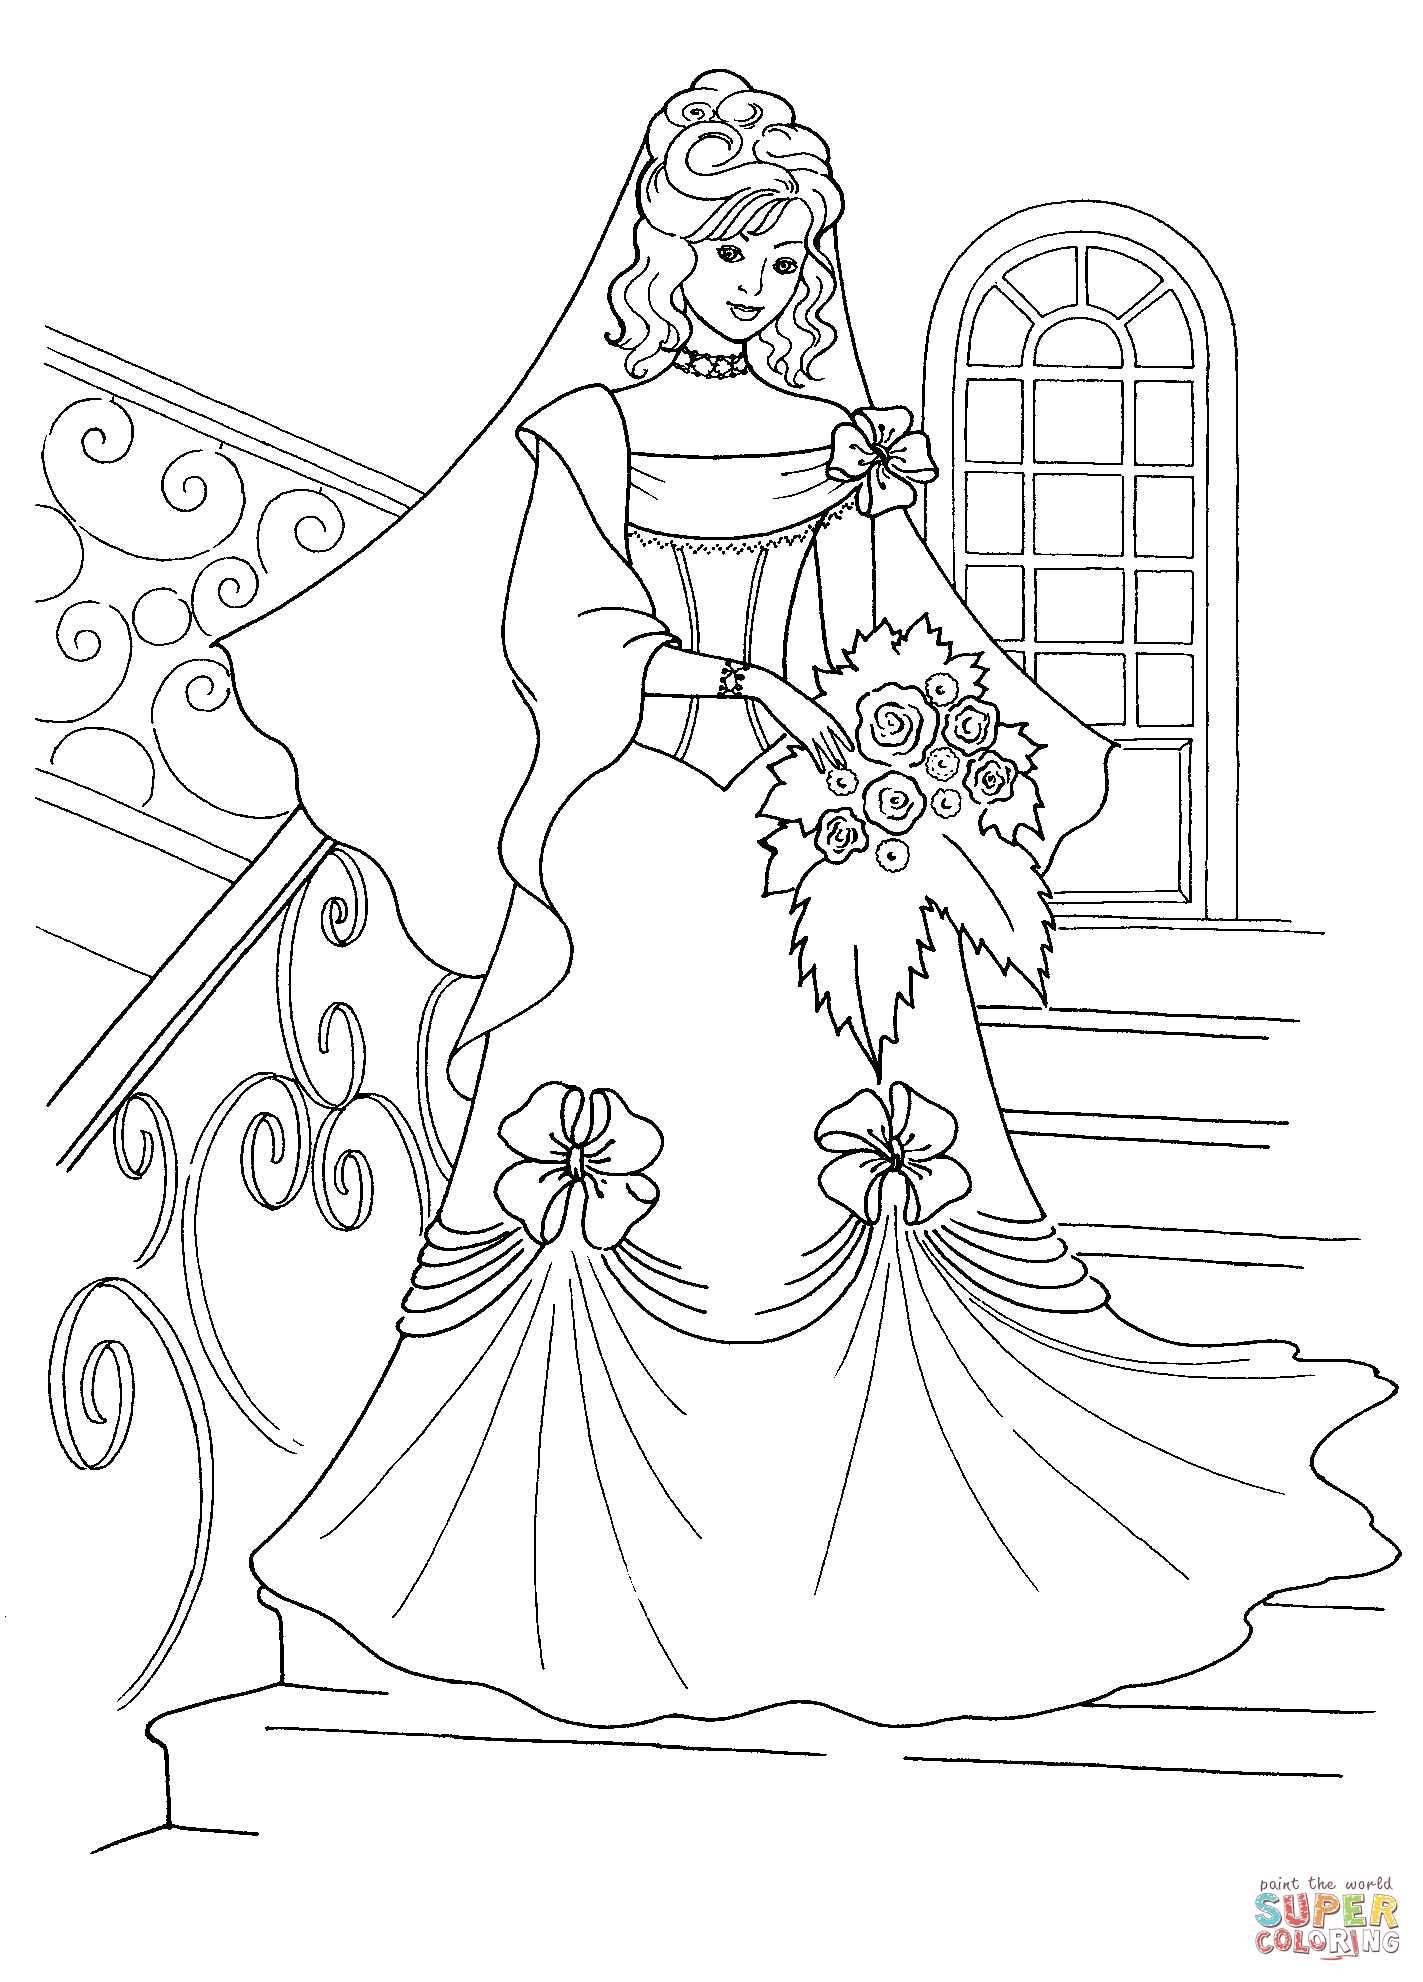 Princess in a Wedding Dress coloring page | Free Printable Coloring Pages